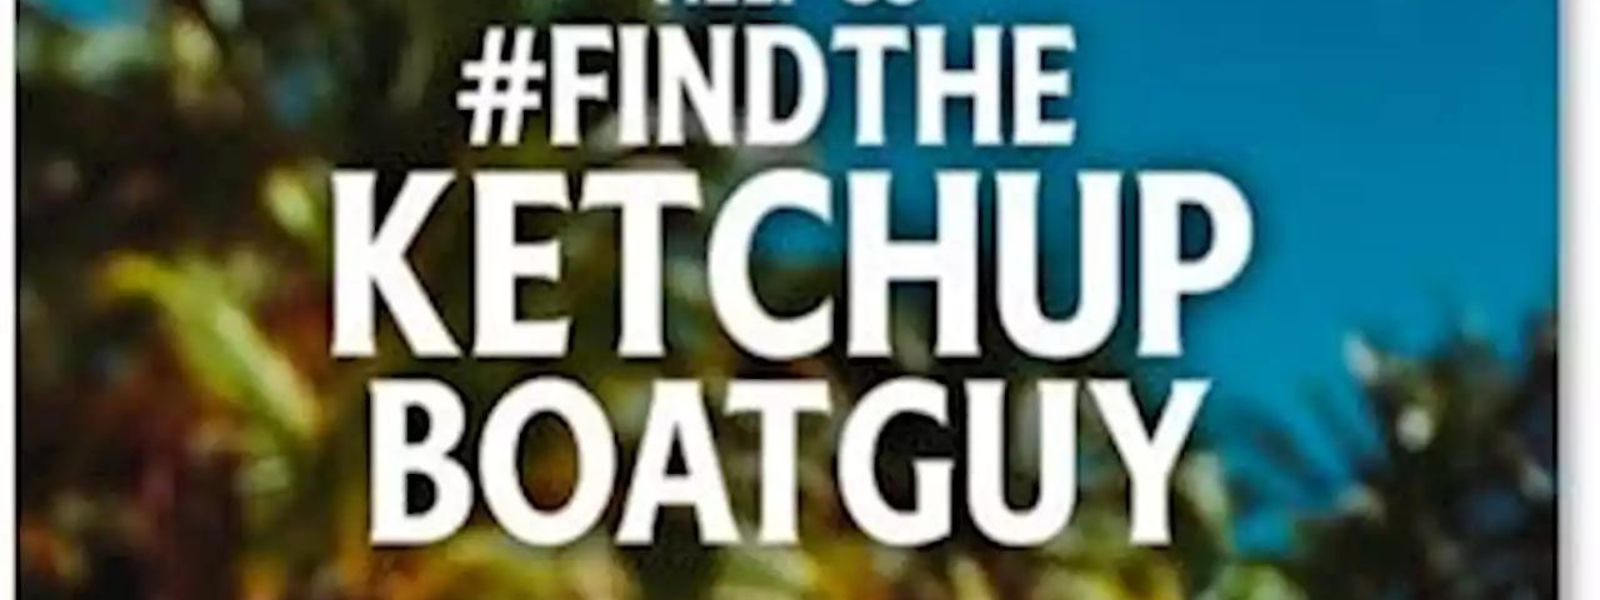 Heinz searching for sailor who survived on ketchup